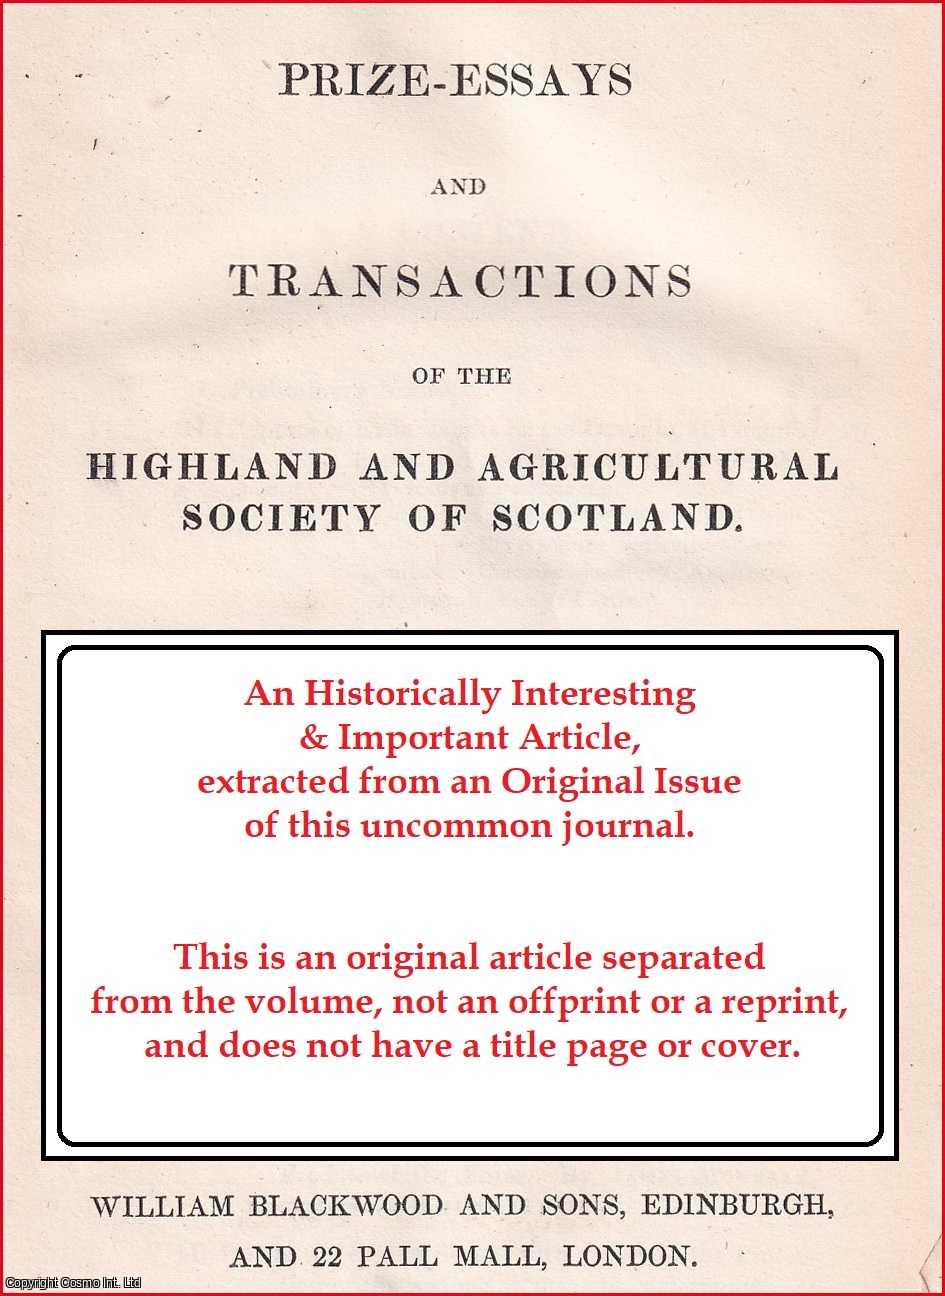 Mr. John Grigor, Nurseryman, Forres. - The Pinus Sylvestris, with the Number of Plants Raised from Native Seed, & Sold. An uncommon original article from the Prize Essays and Transactions of the Highland Society of Scotland, 1835.